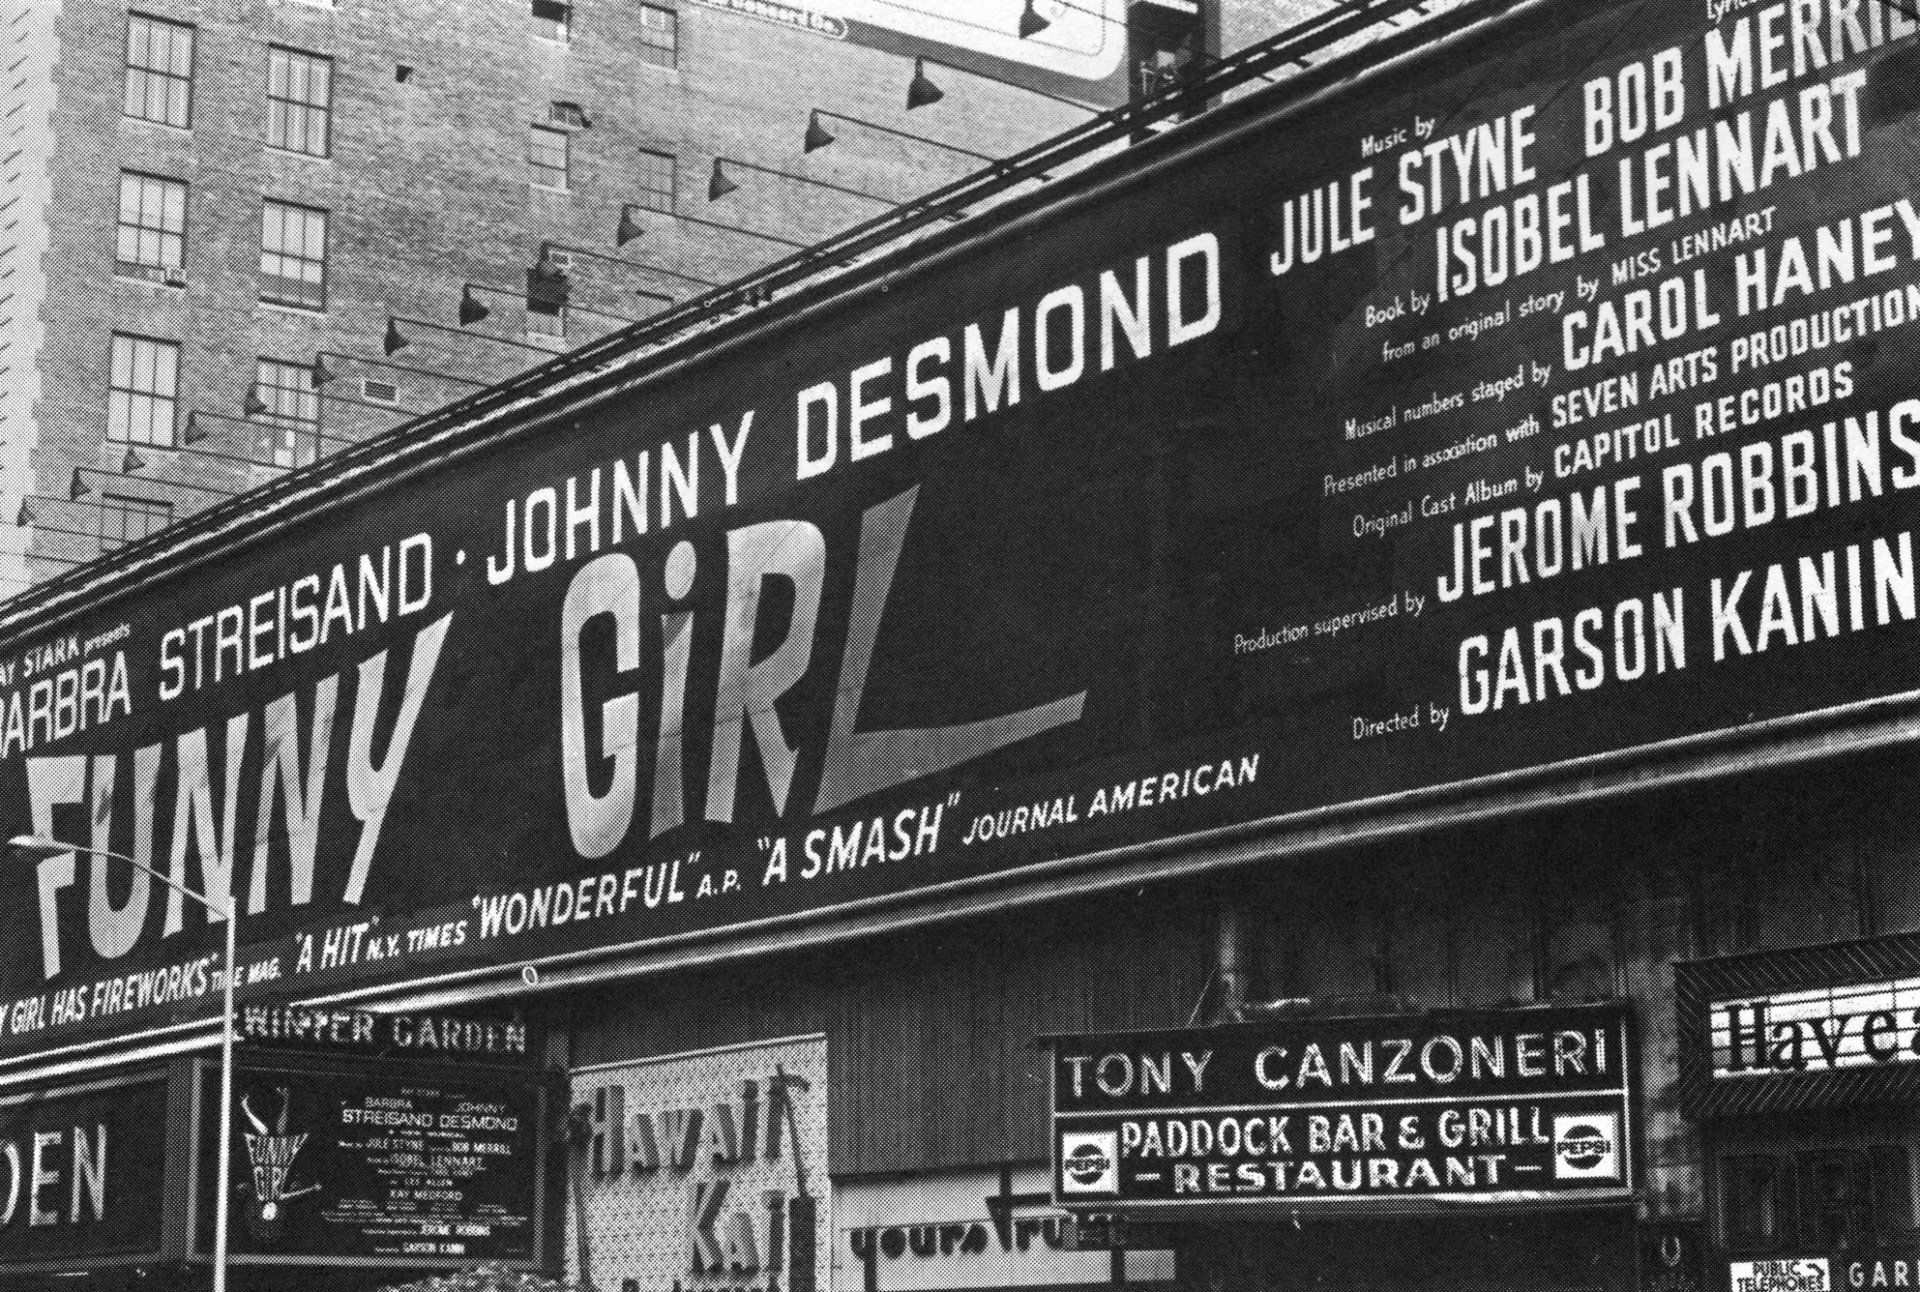 The Winter Garden Theatre marquee with Johnny Desmond on it.